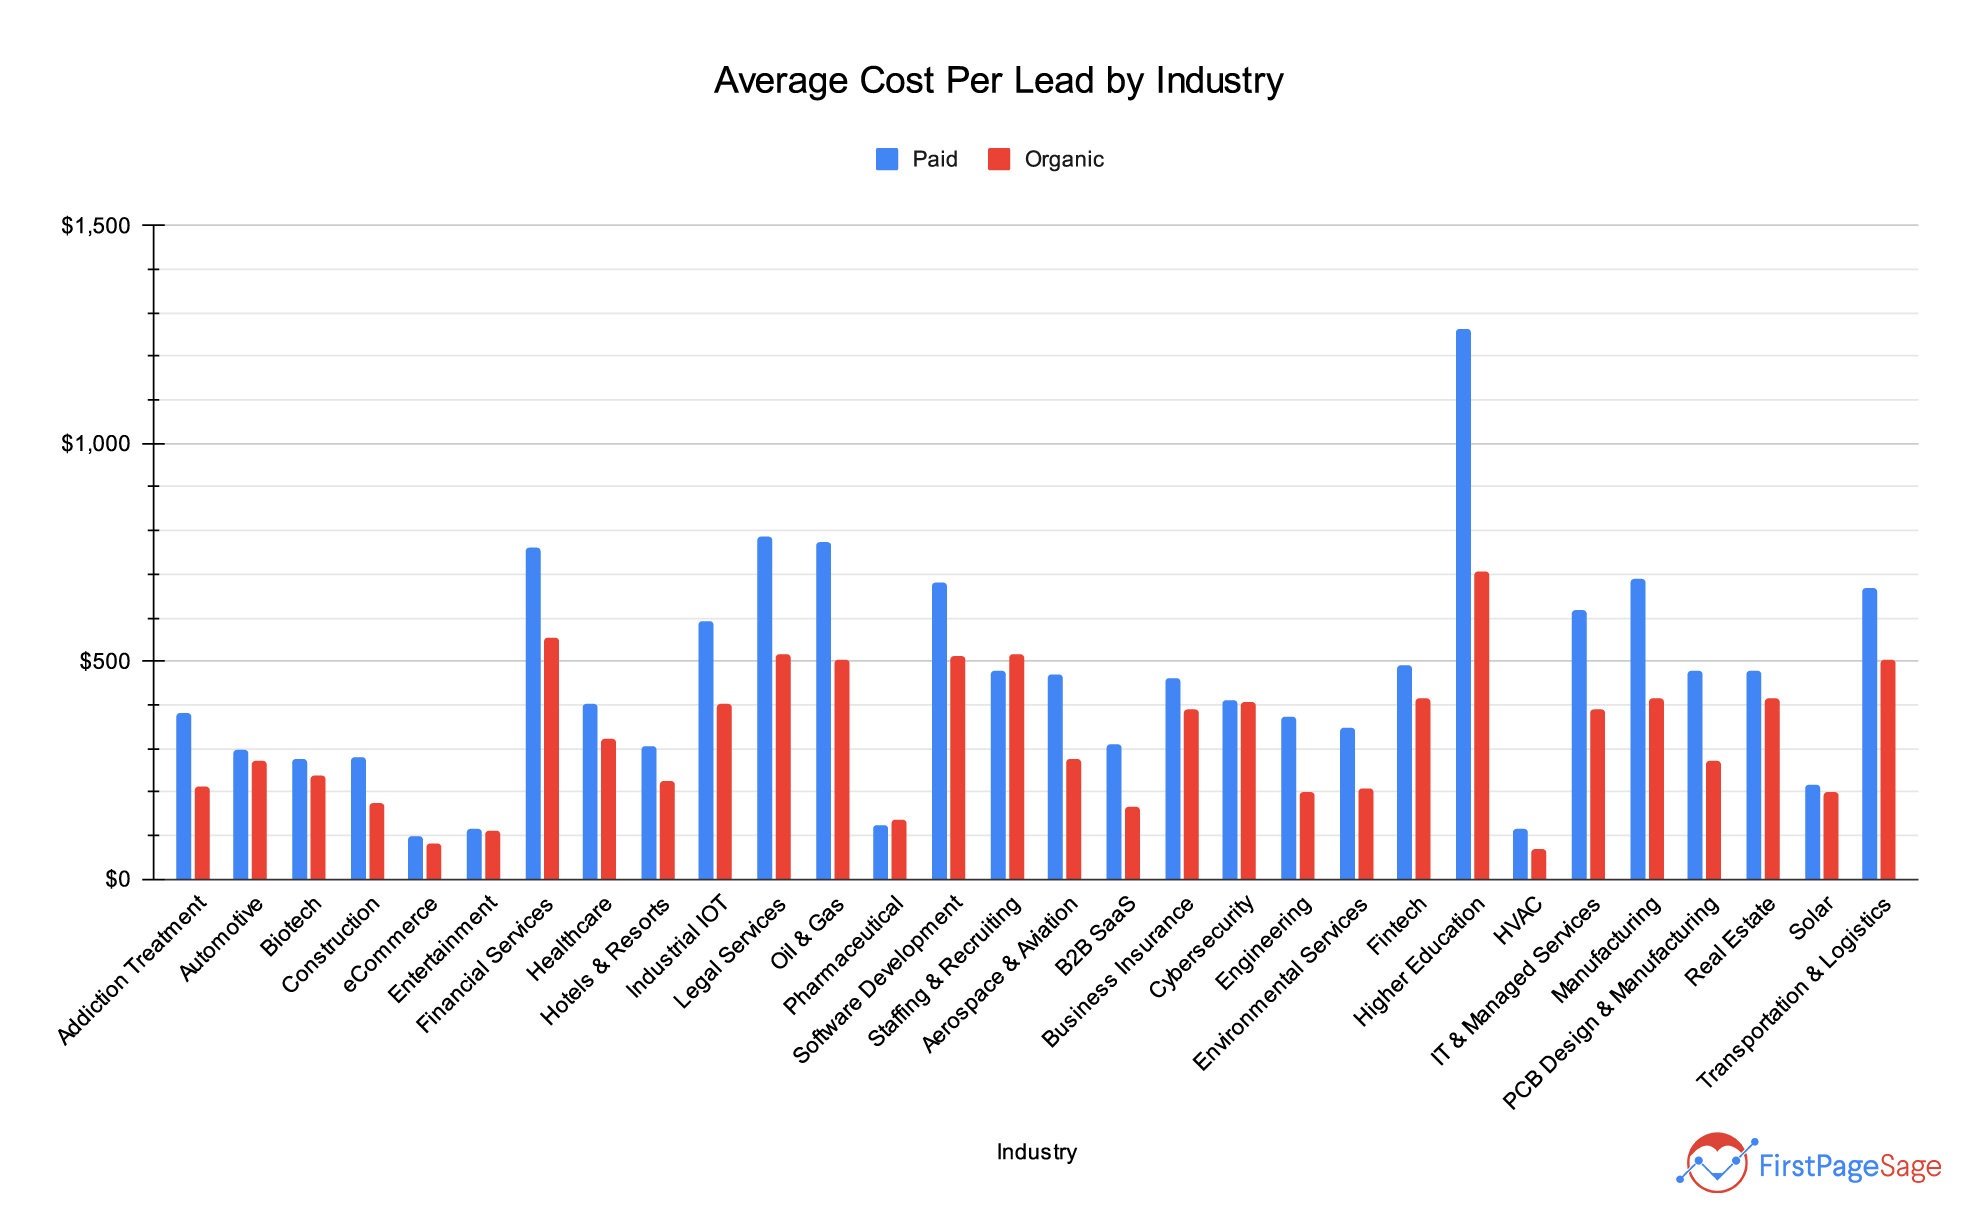 Average cost per lead by industry for inbound and outbound channels